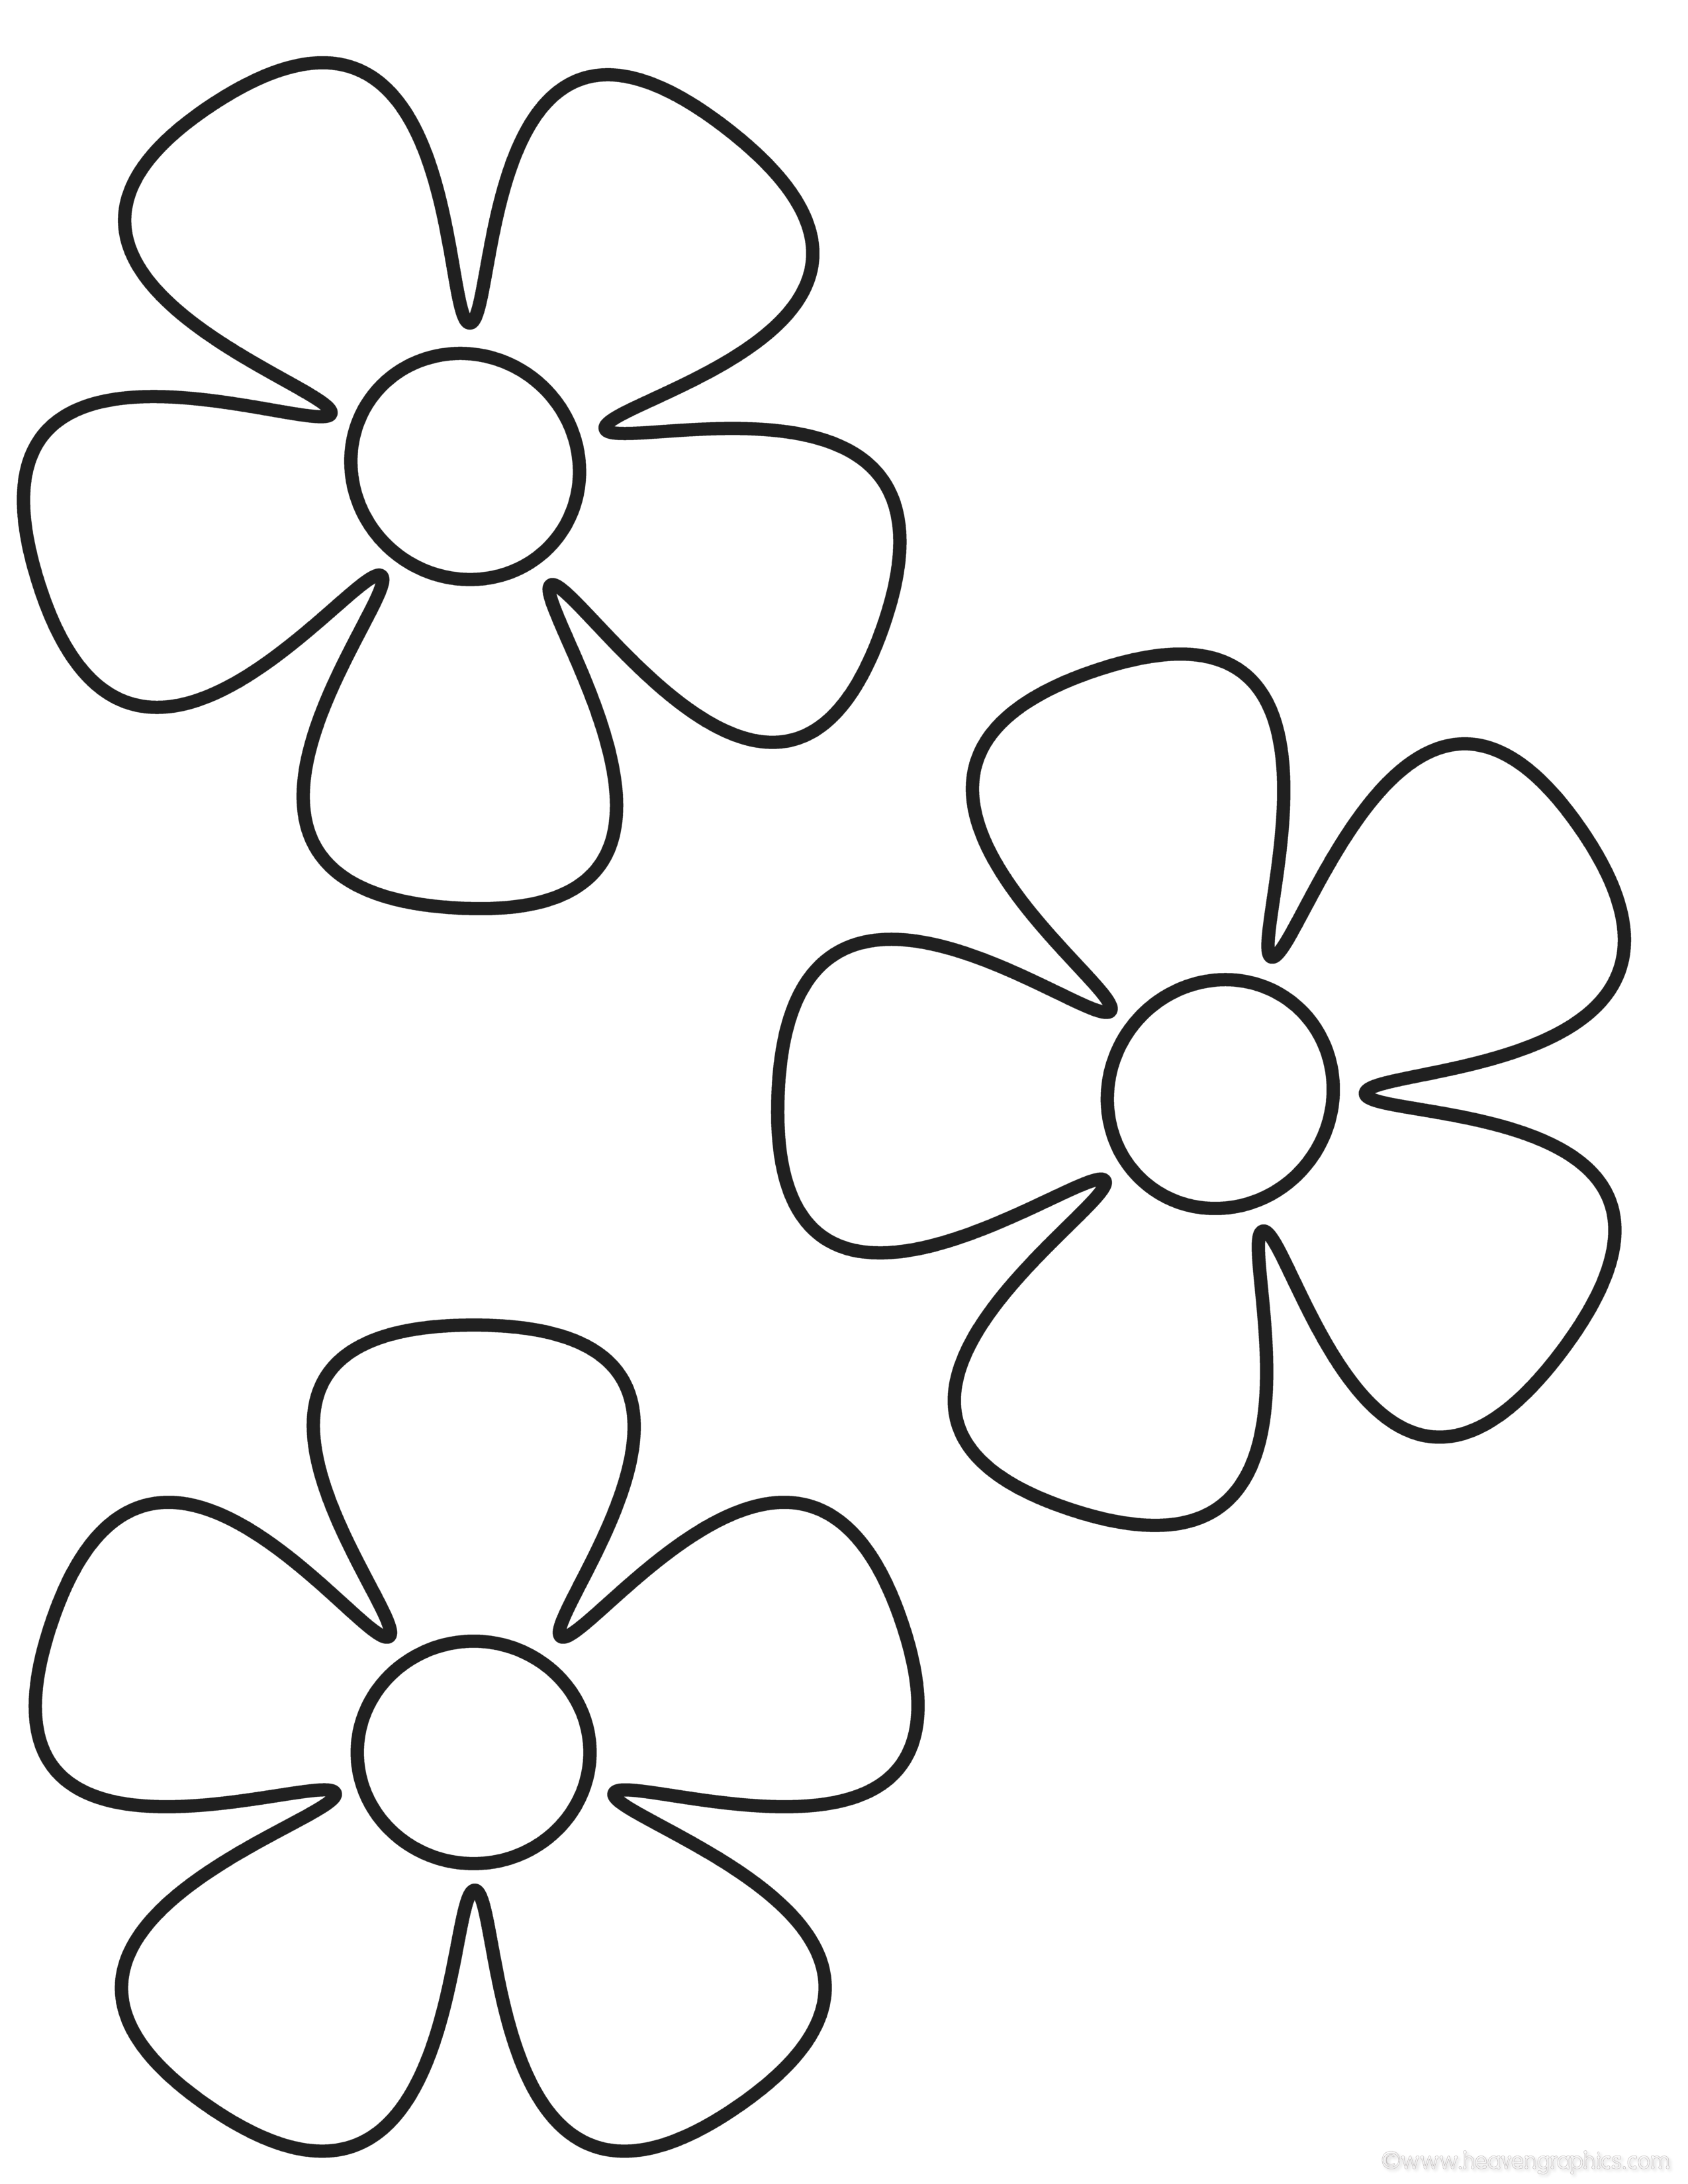 Flower Coloring Pages (1) Coloring Kids - Coloring Kids